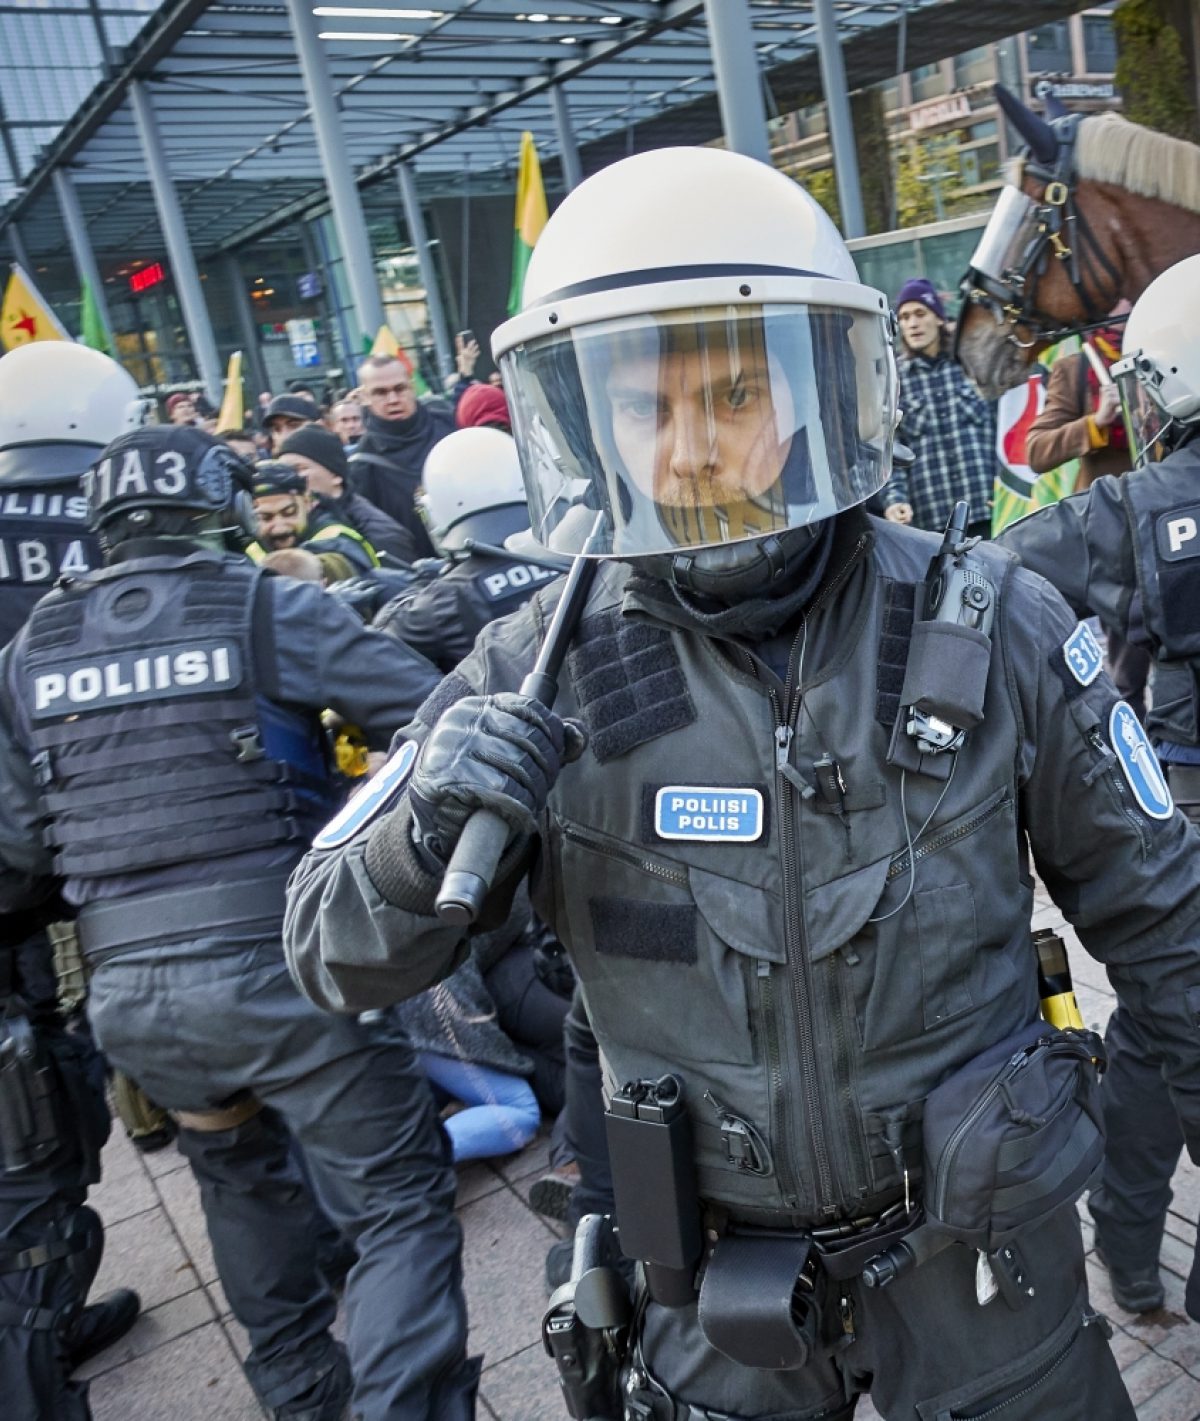 Documentation of the Turkey out of Rojava demonstration in Helsinki on 19 October 2019 (cropped detail). Police at a demonstration against the Turkish military action in the autonomous Kurdish region. Photo: Hannu Häkkinen / Finnish Heritage Agency